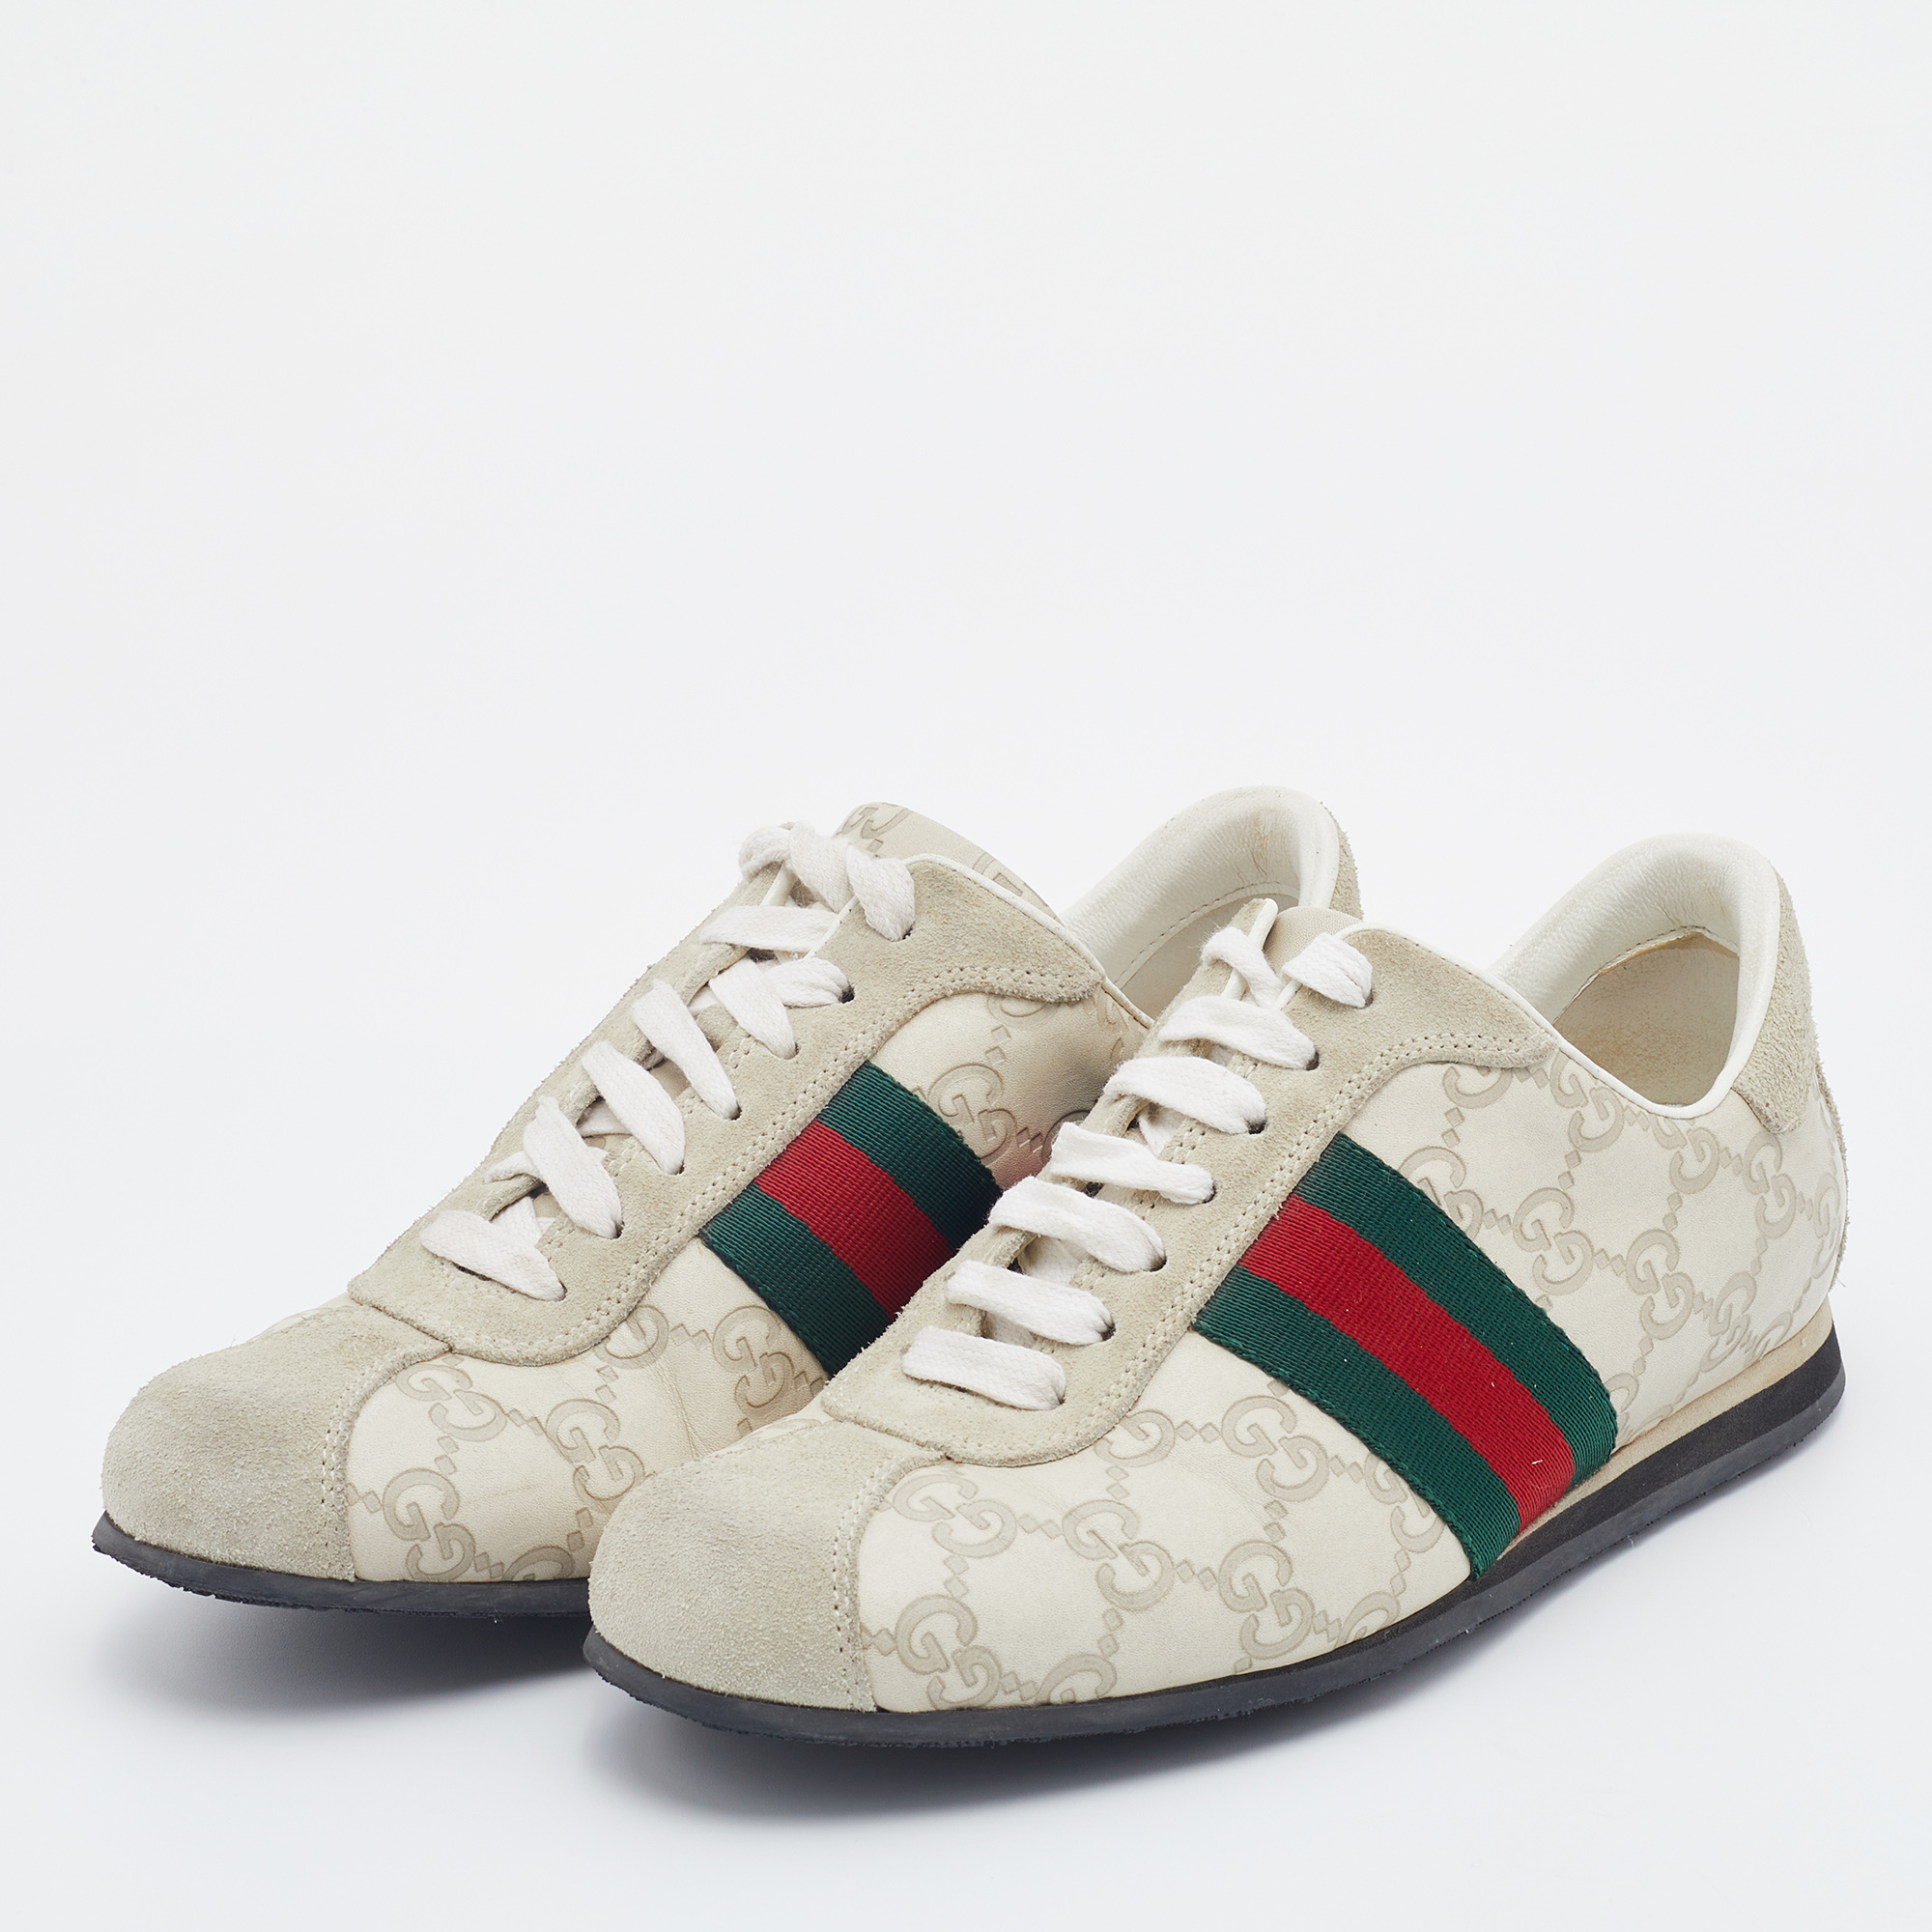 

Gucci Off-White Guccissima Leather And Suede Web Low Top Sneakers Size